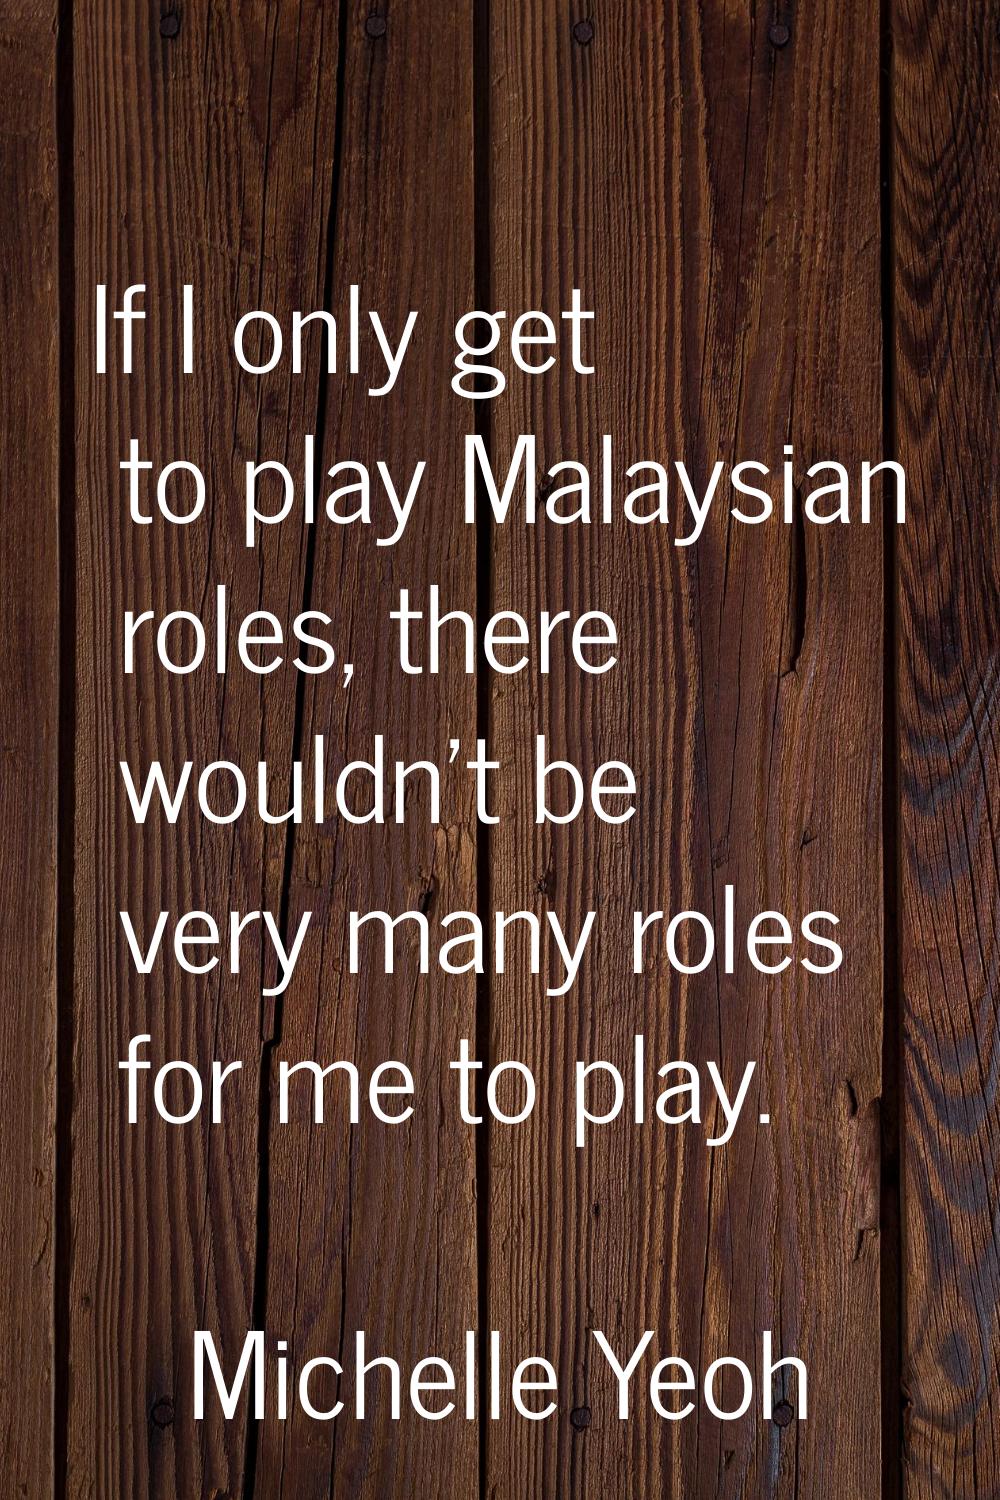 If I only get to play Malaysian roles, there wouldn't be very many roles for me to play.